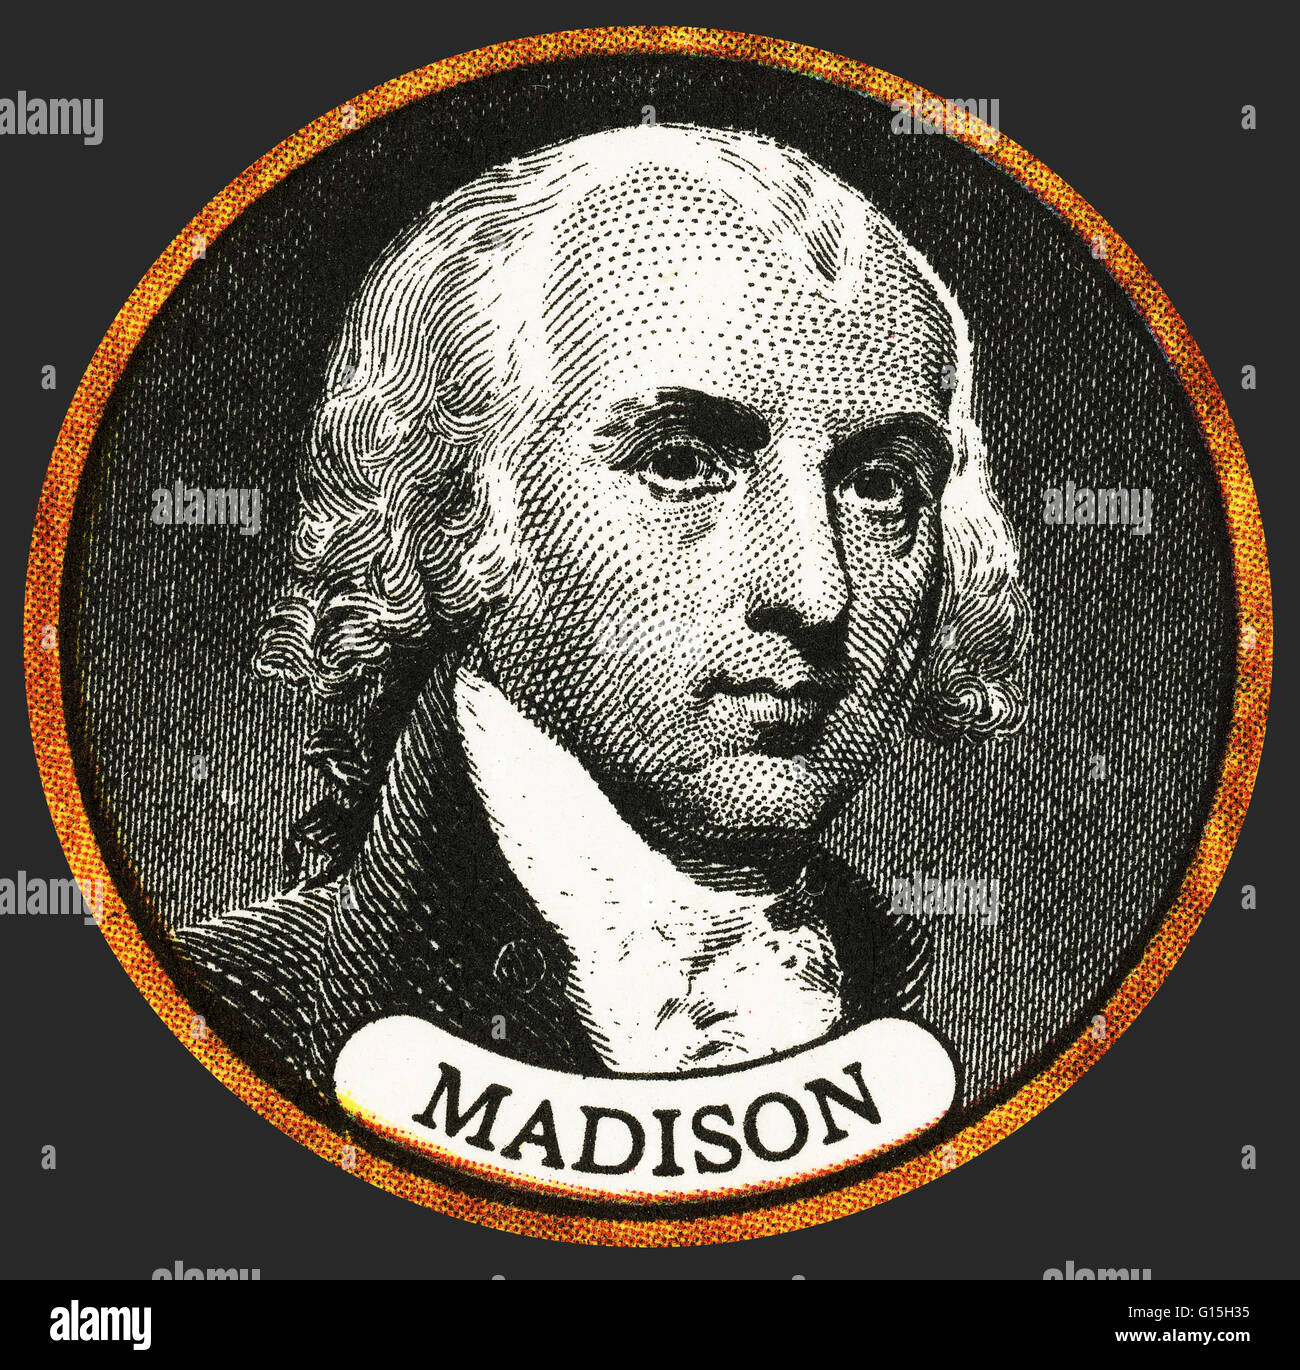 James Madison, Jr. (March 16, 1751 - June 28, 1836) was the fourth President of the United States (1809-1817) statesman and political theorist. Madison is one of the authors of the Federalist Papers, a series of 85 articles or essays promoting the ratific Stock Photo